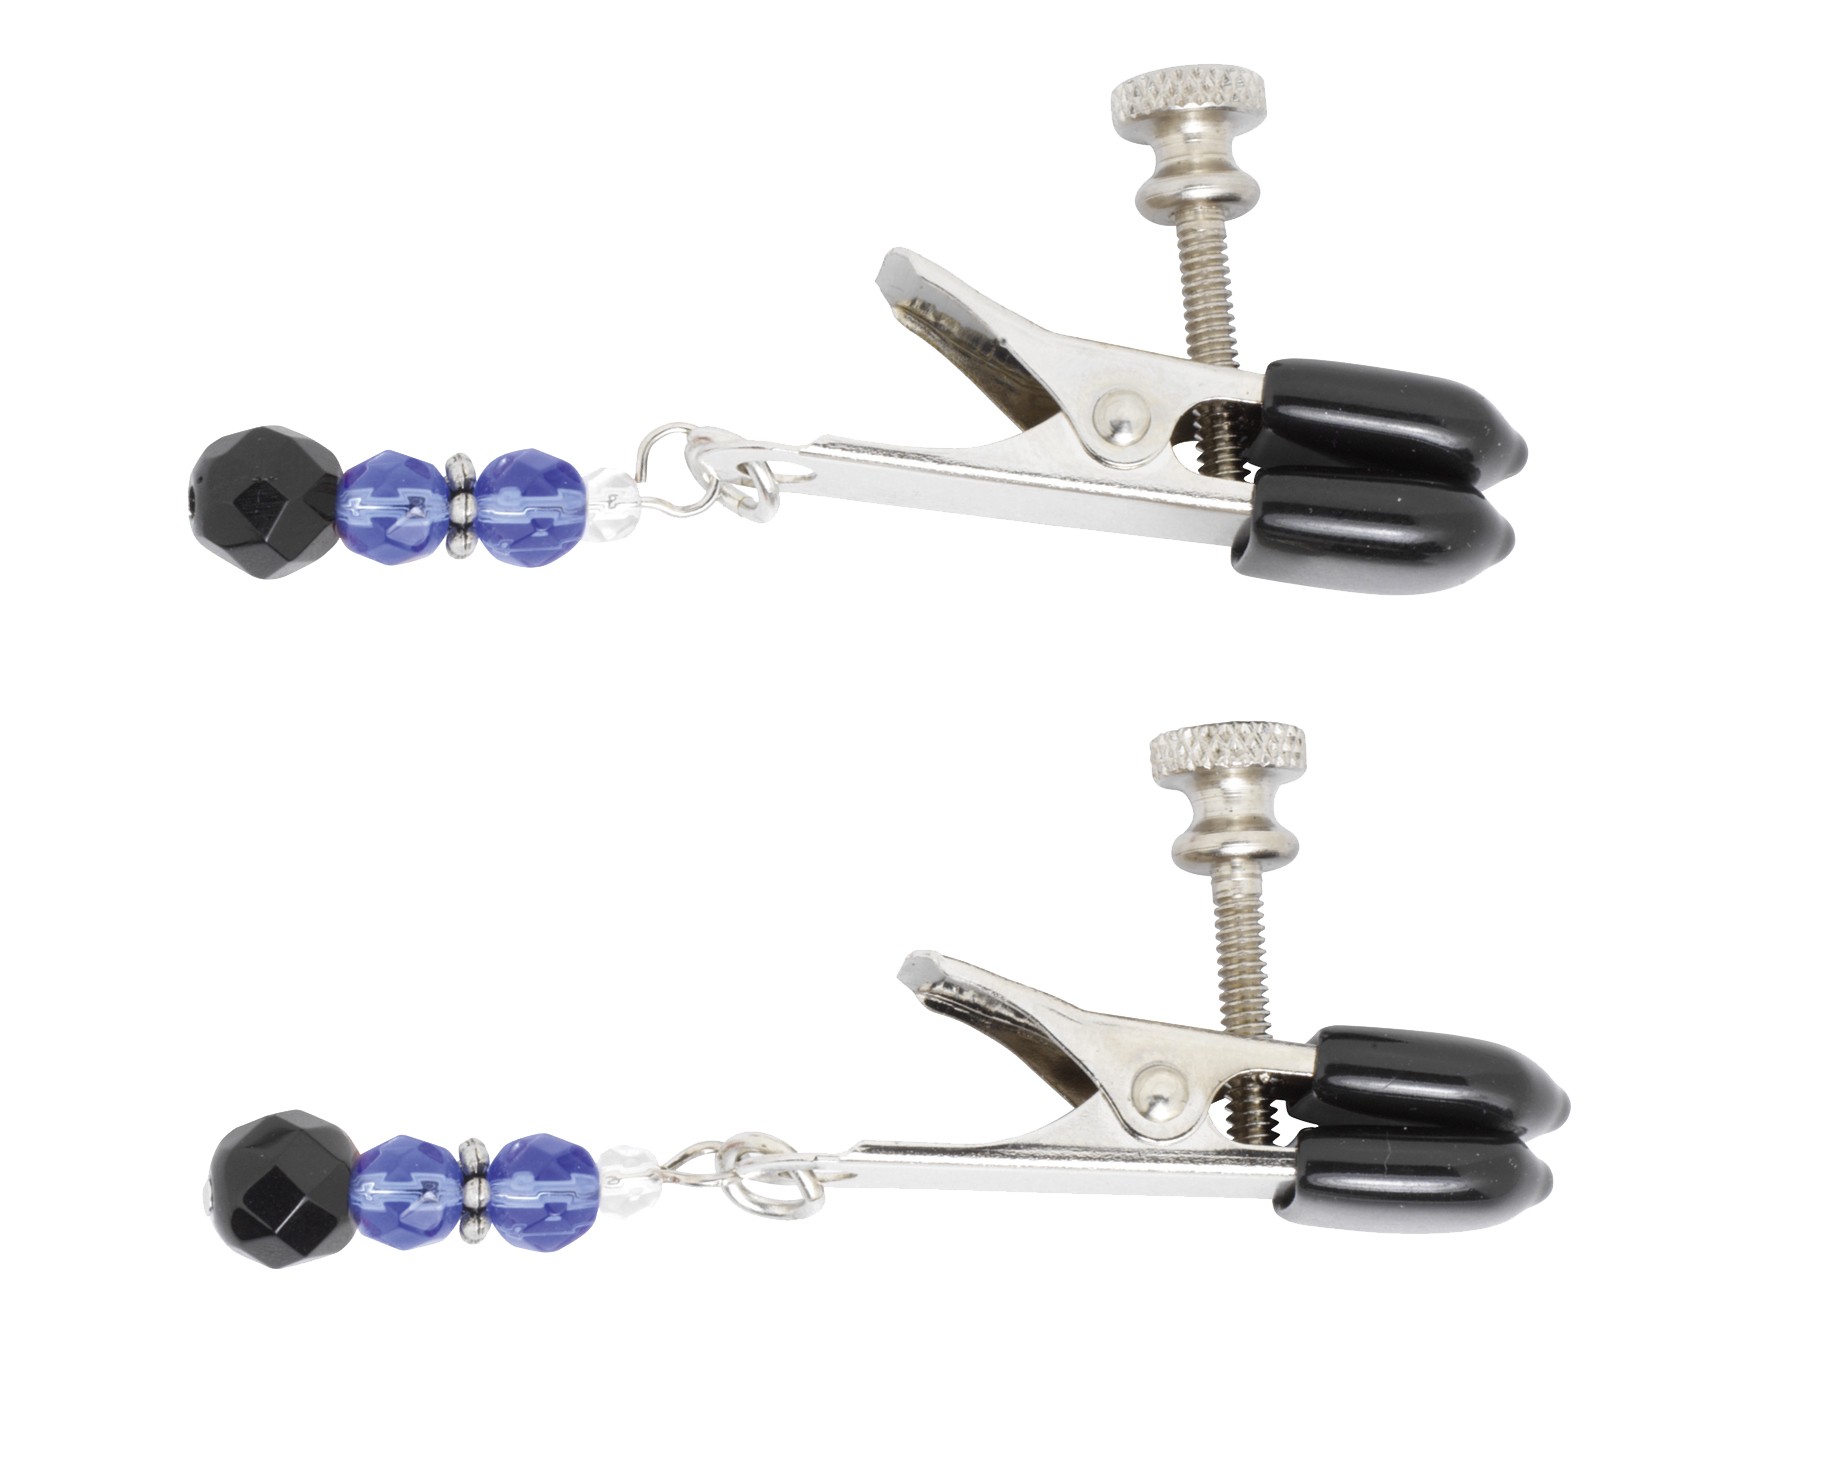 Blue Beaded Clamps - Adjustable Broad Tip